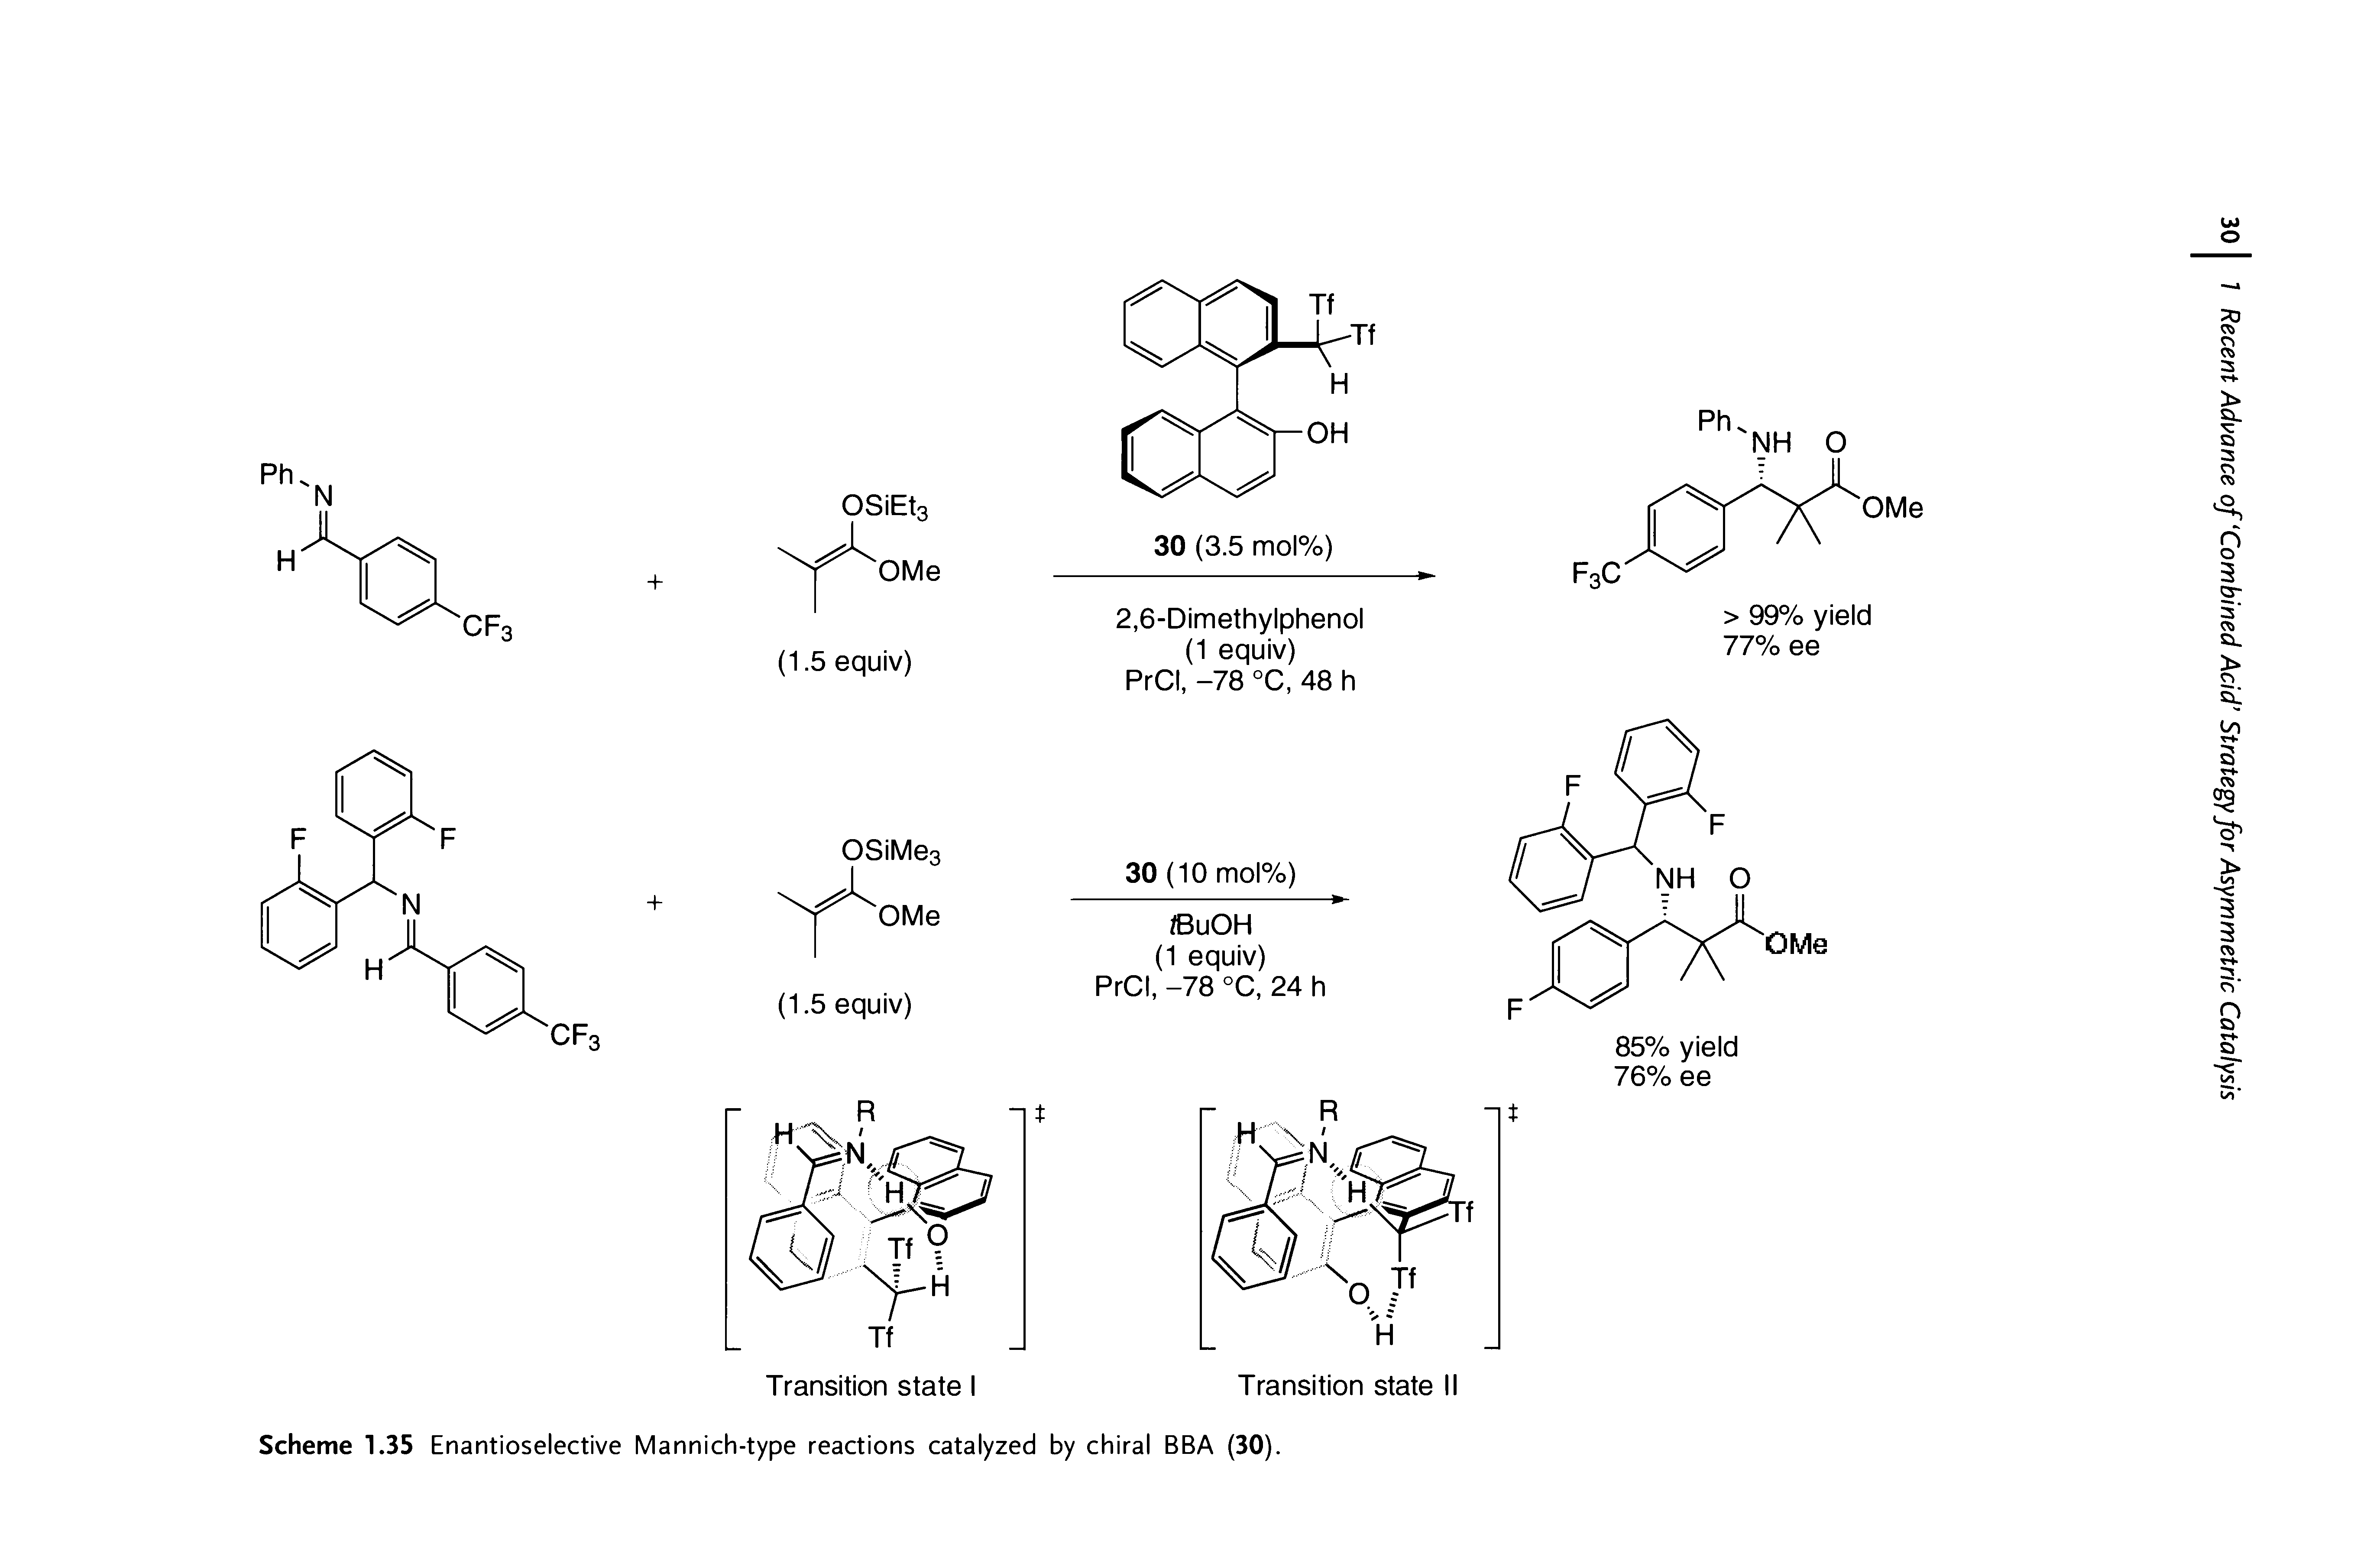 Scheme 1.35 Enantioselective Mannich-type reactions catalyzed by chiral BBA (30).